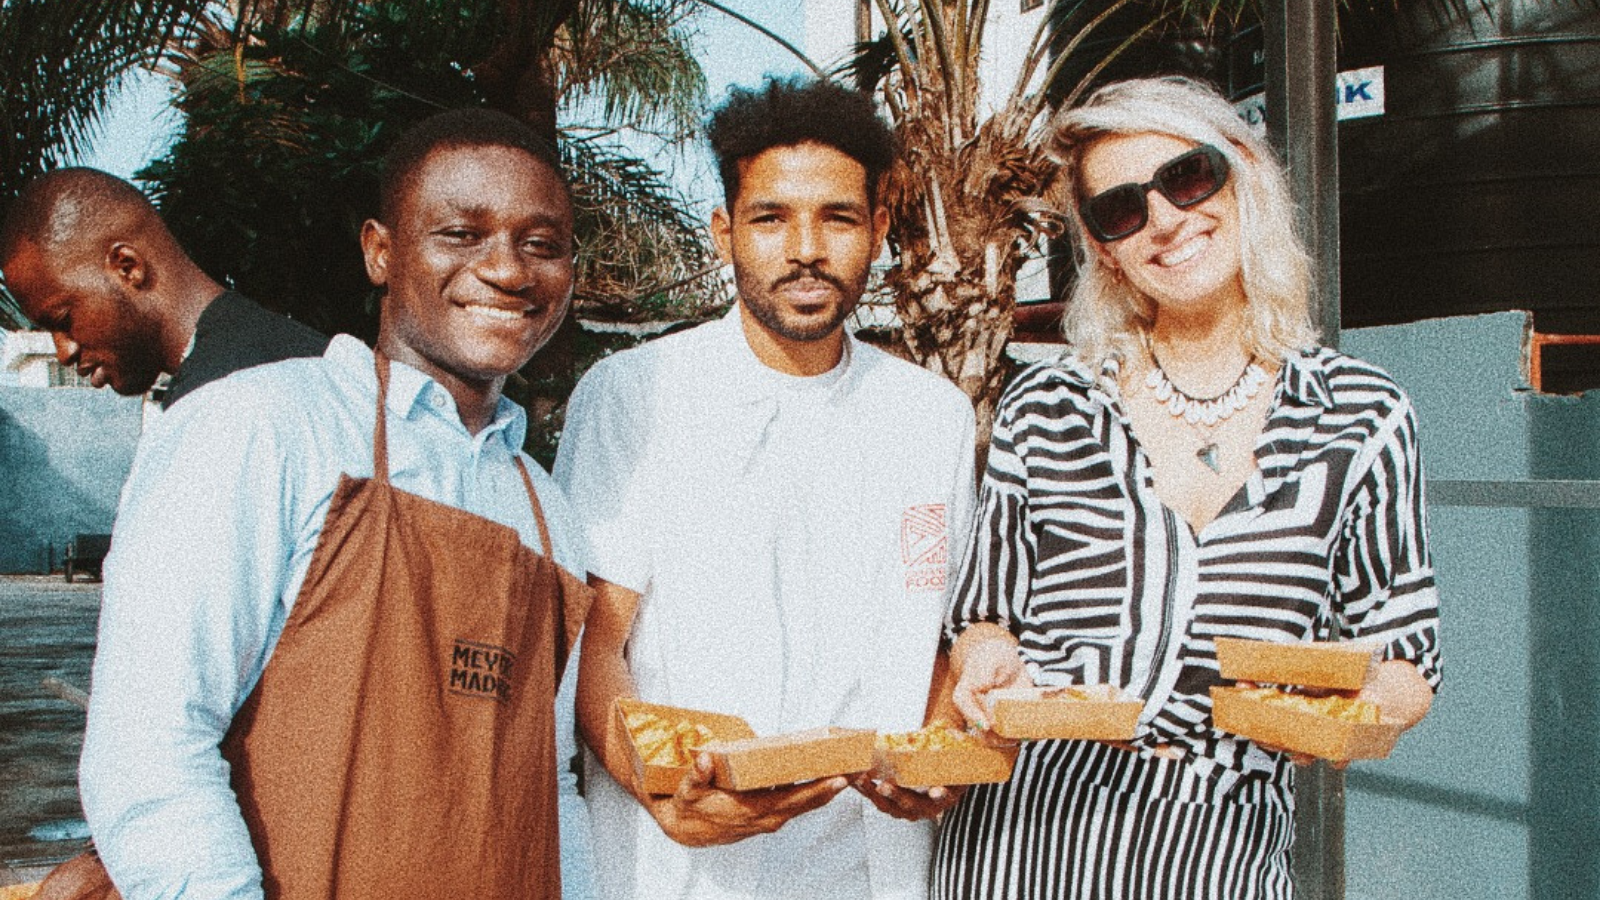 Members of the Ghana Food Movement, Lotte Wouters on the right